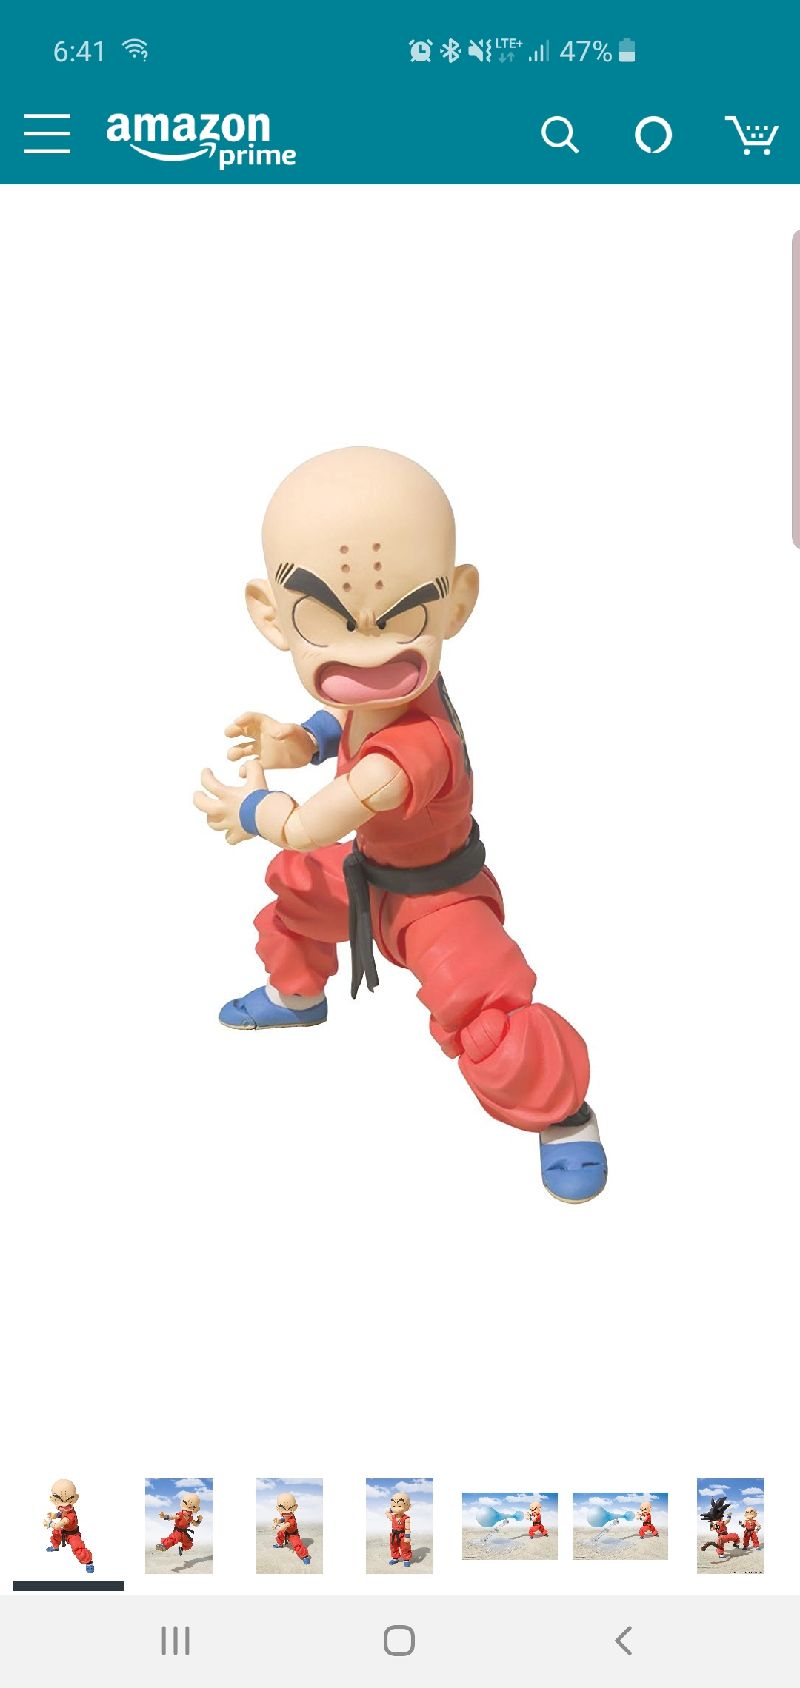 Amazon.com: Tamashii Nations S.H.Figuarts Krillin-the Early Years "Dragon Ball" Action Figures: Gateway

克林